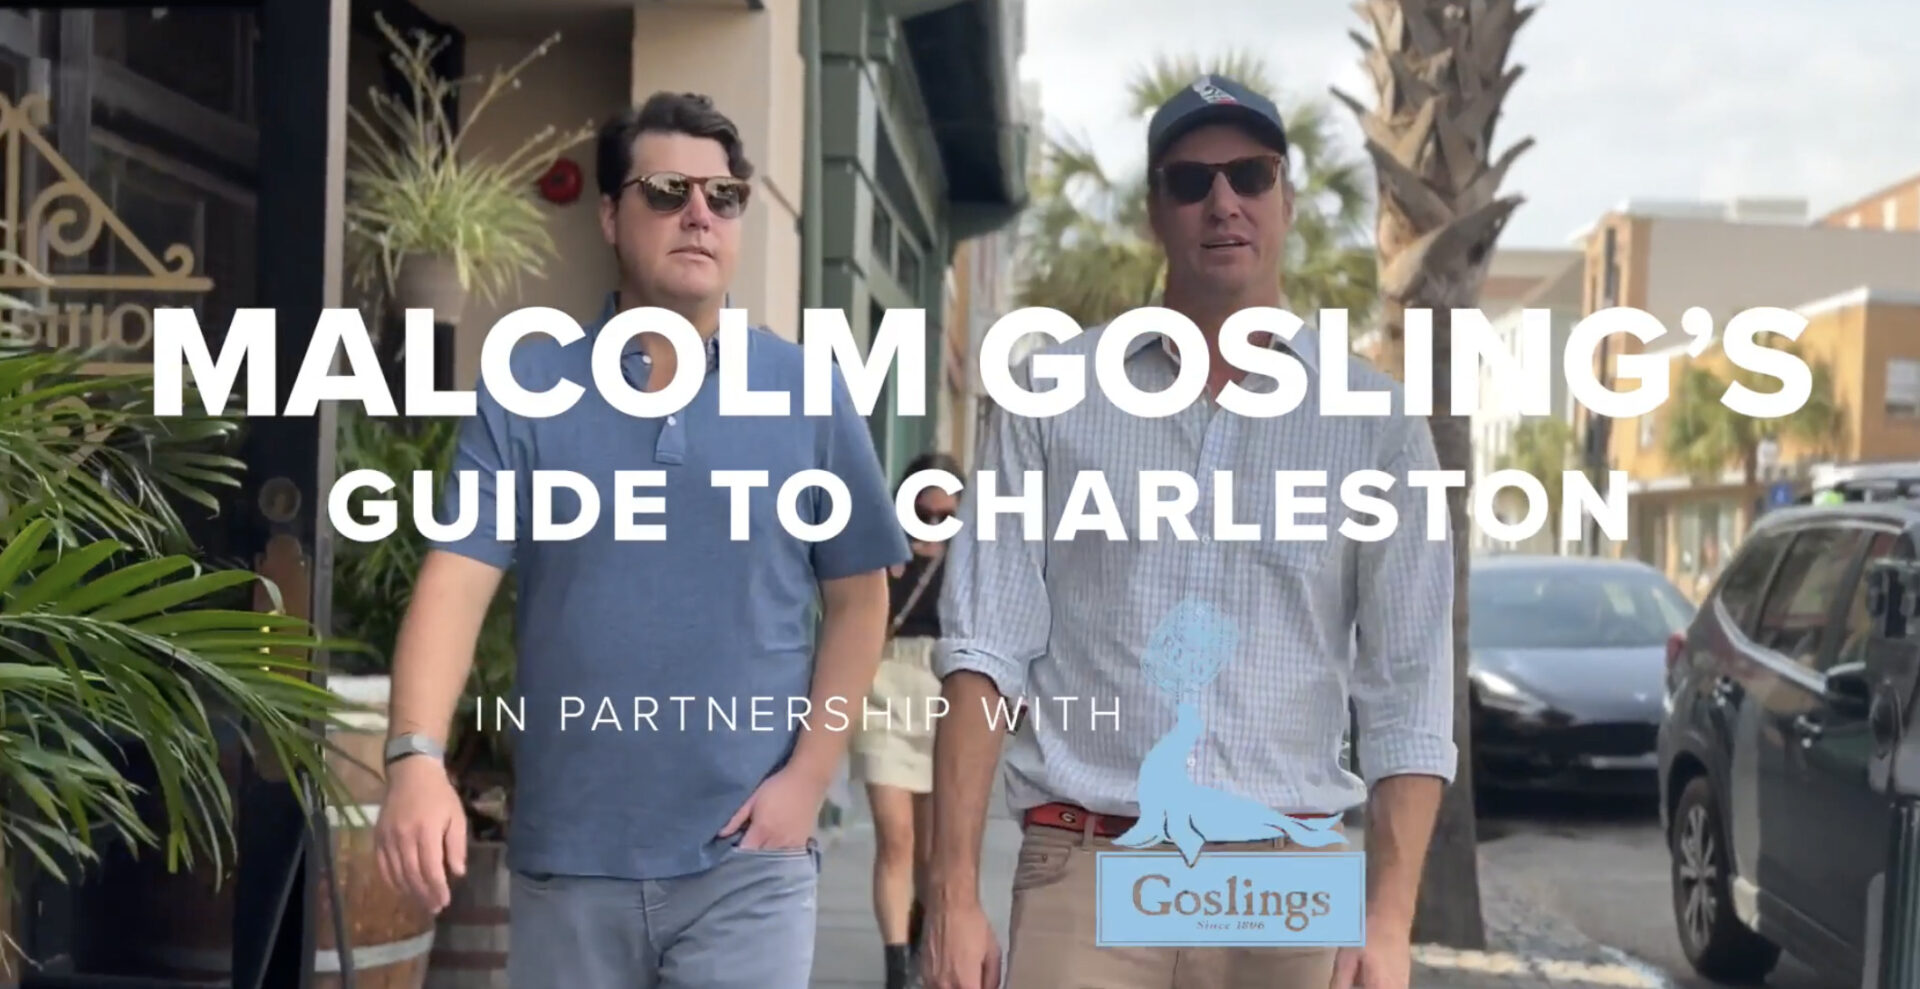 Malcolm Goslings Guide to Charleston